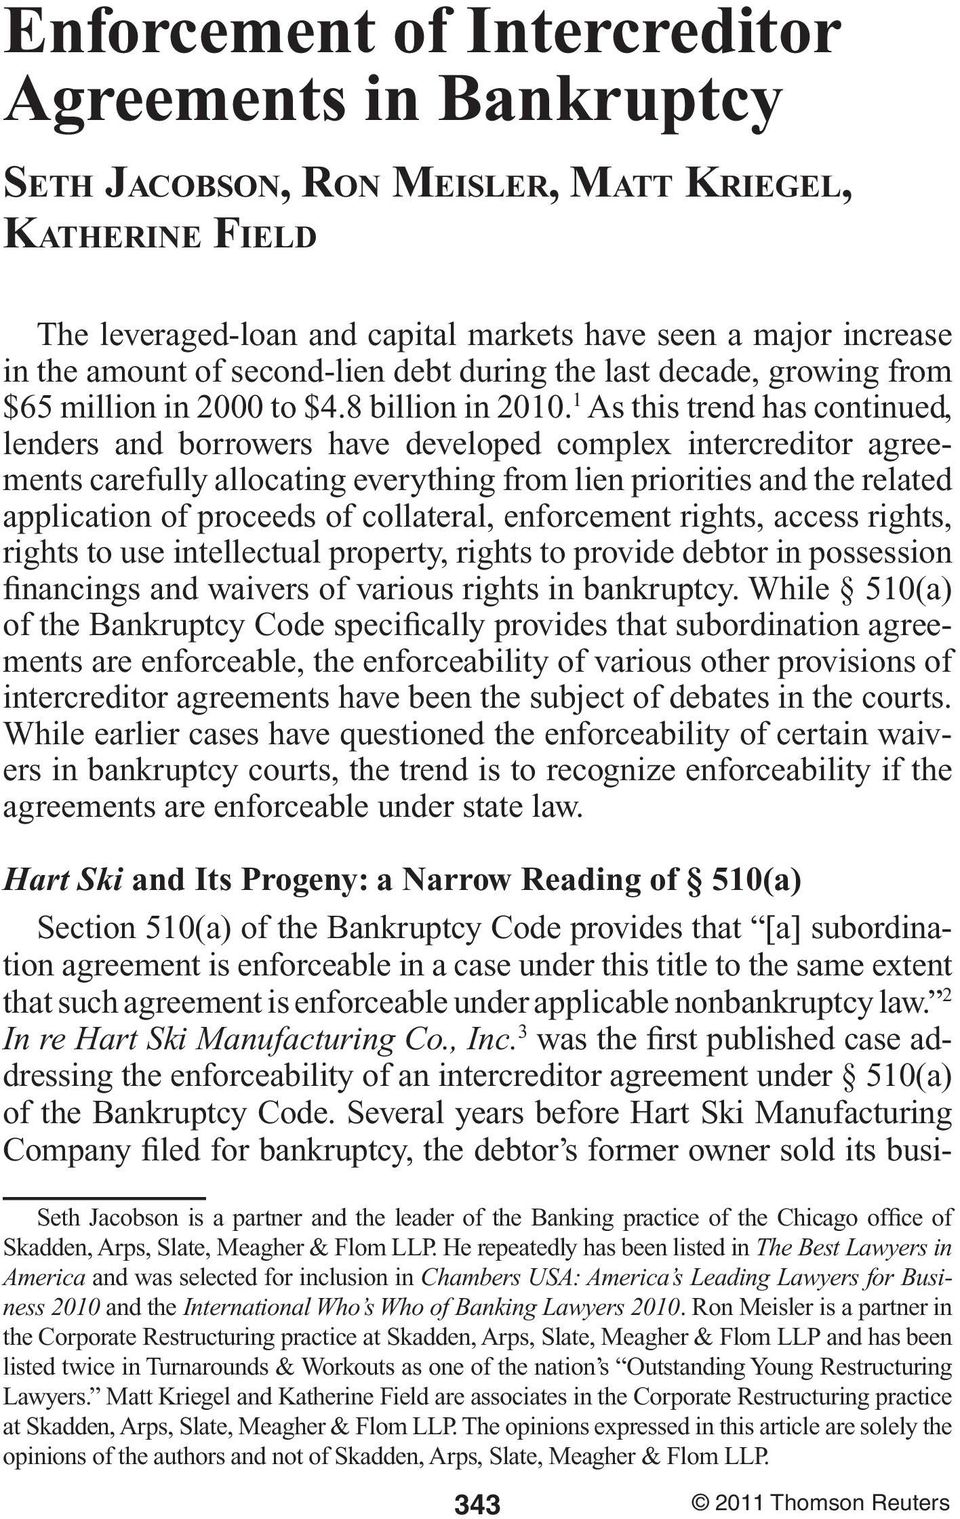 What Is An Intercreditor Agreement Enforcement Of Intercreditor Agreements In Bankruptcy Pdf